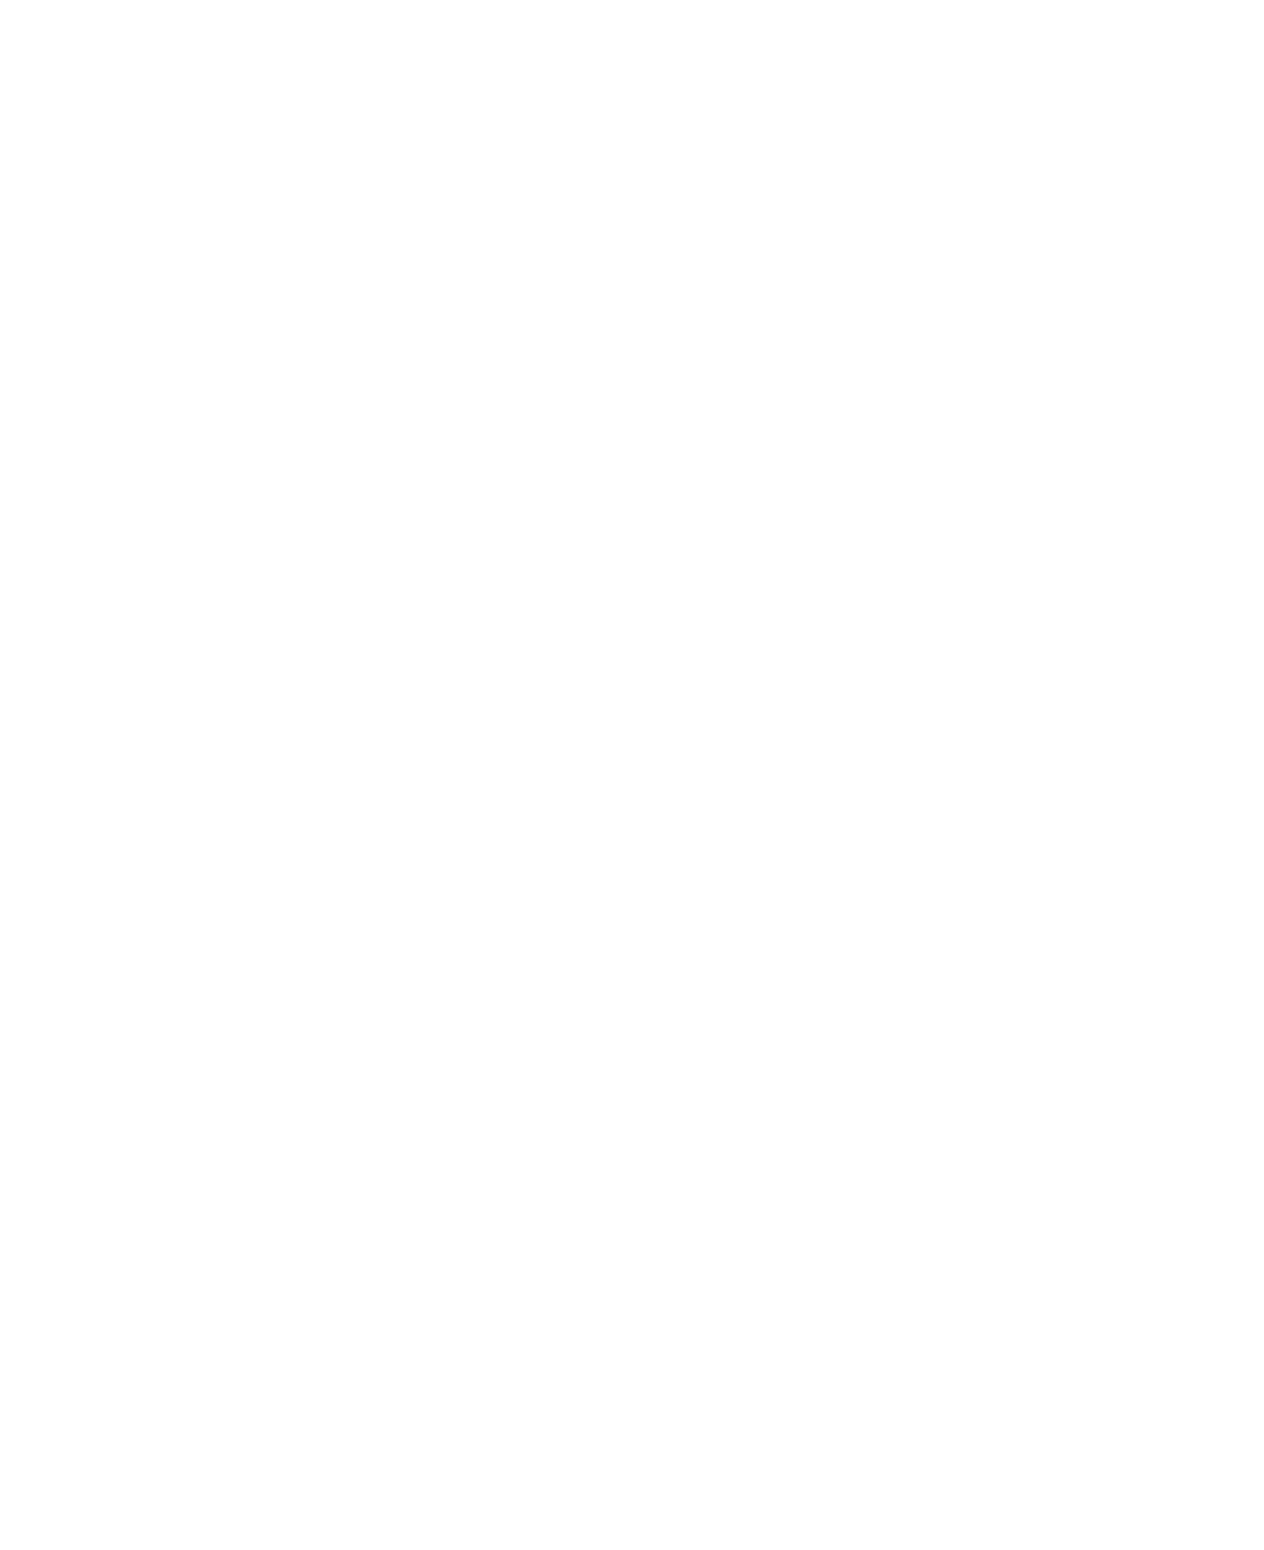 Exelixis logo in transparent PNG and vectorized SVG formats